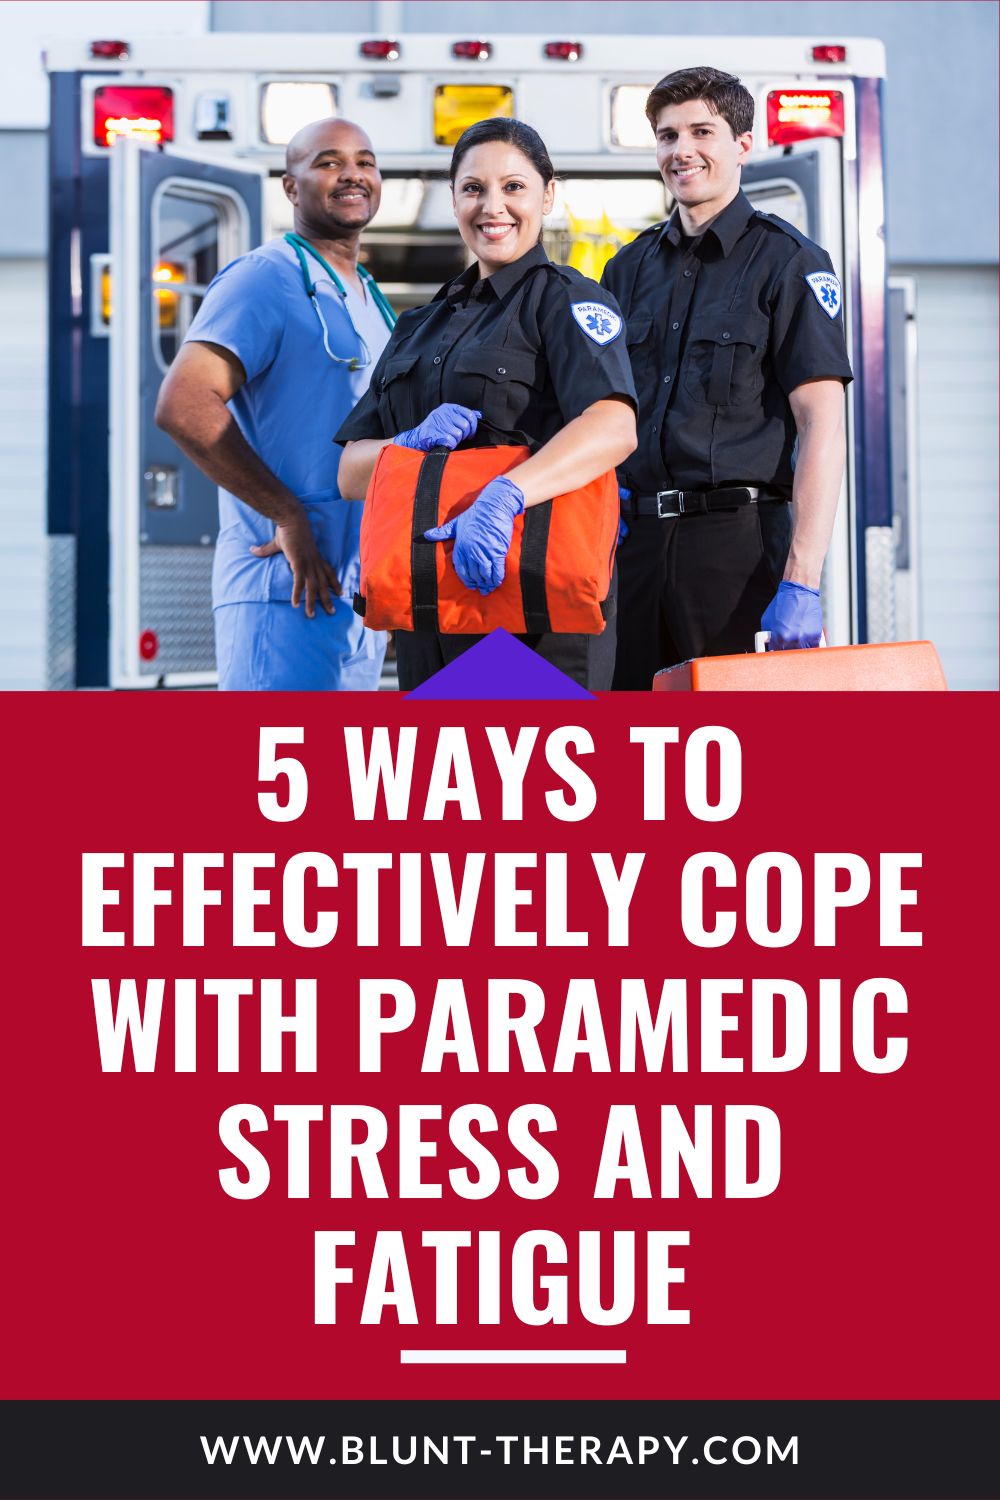 5 Ways To Effectively Cope With Paramedic Stress and Fatigue